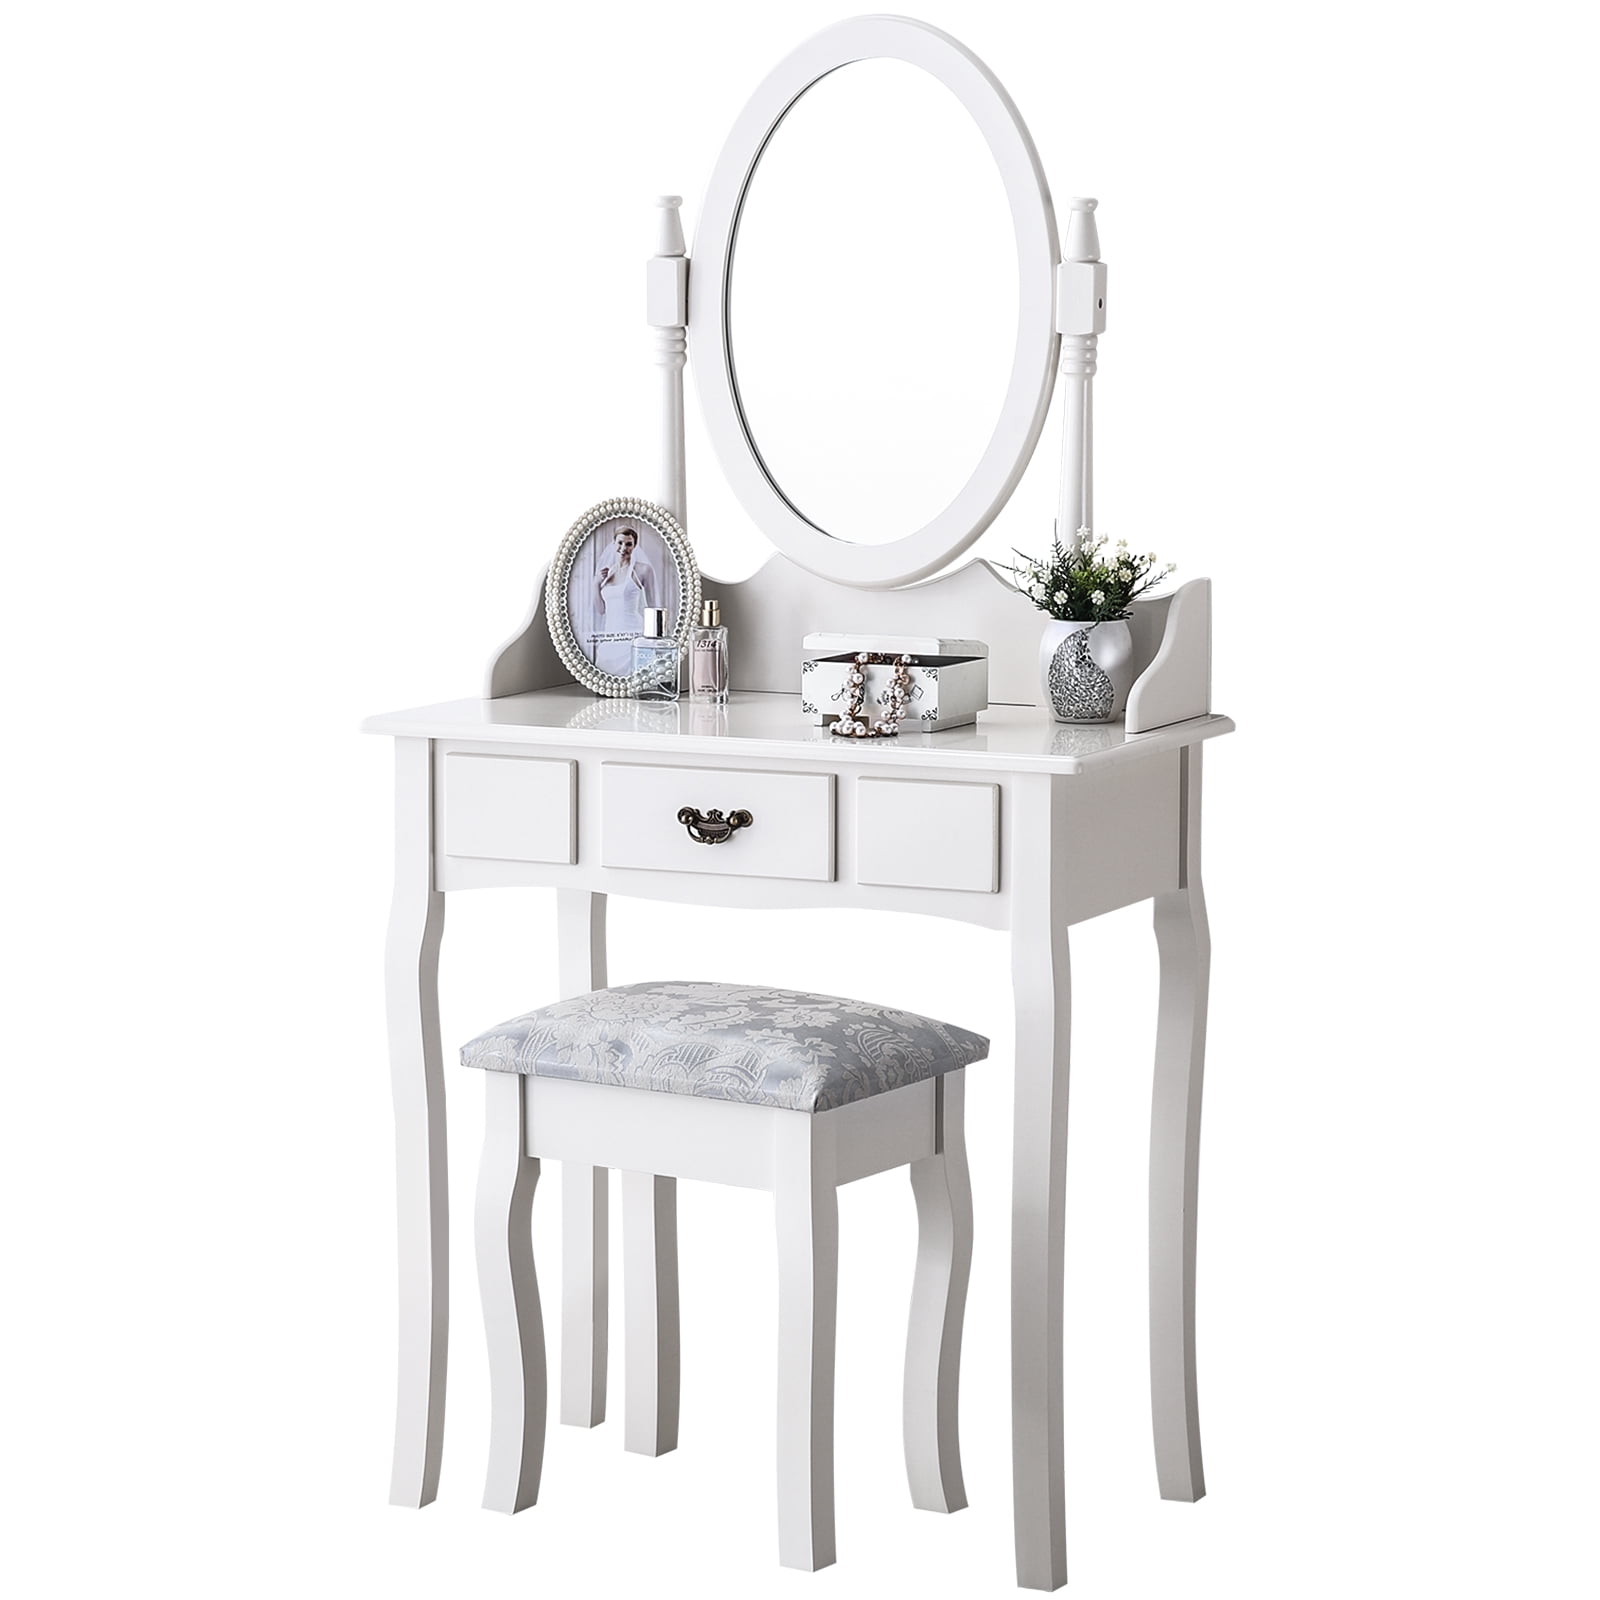 Mecor Dressing Table Vanity Makeup, Mecor Vanity Table Set Makeup With Oval Mirror Stool